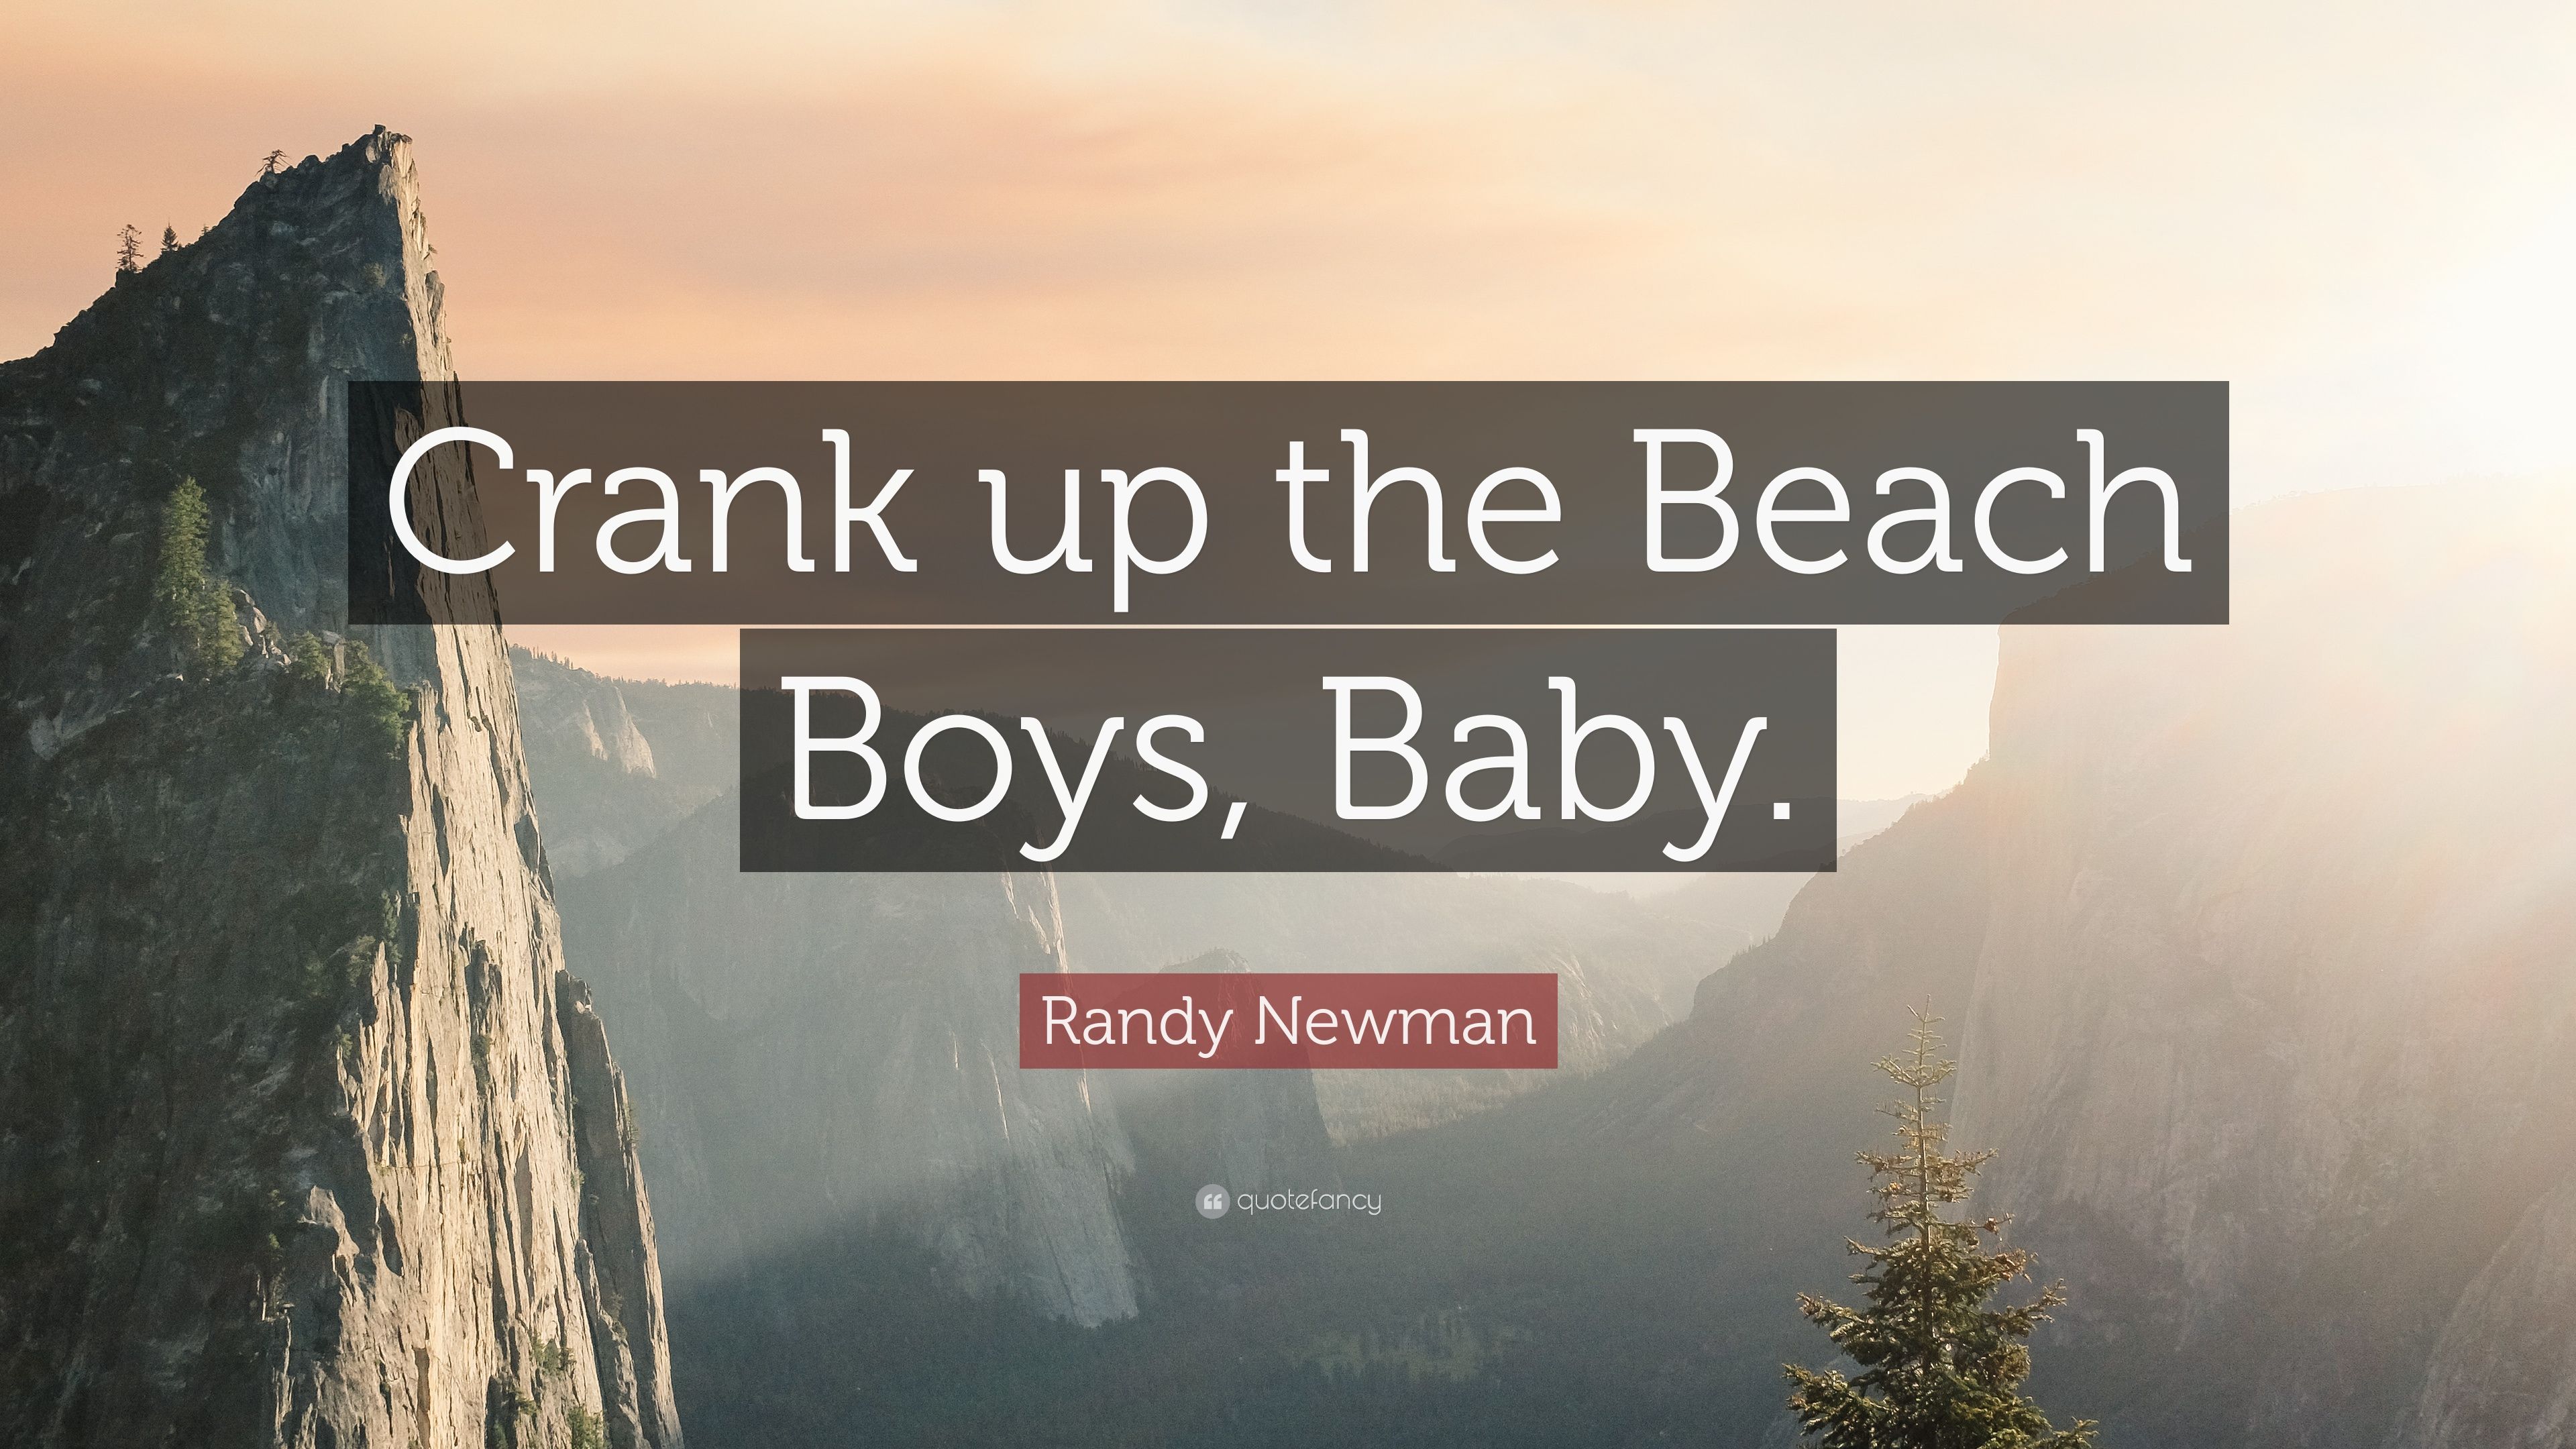 Randy Newman Quote: “Crank up the Beach Boys, Baby.” 7 wallpaper